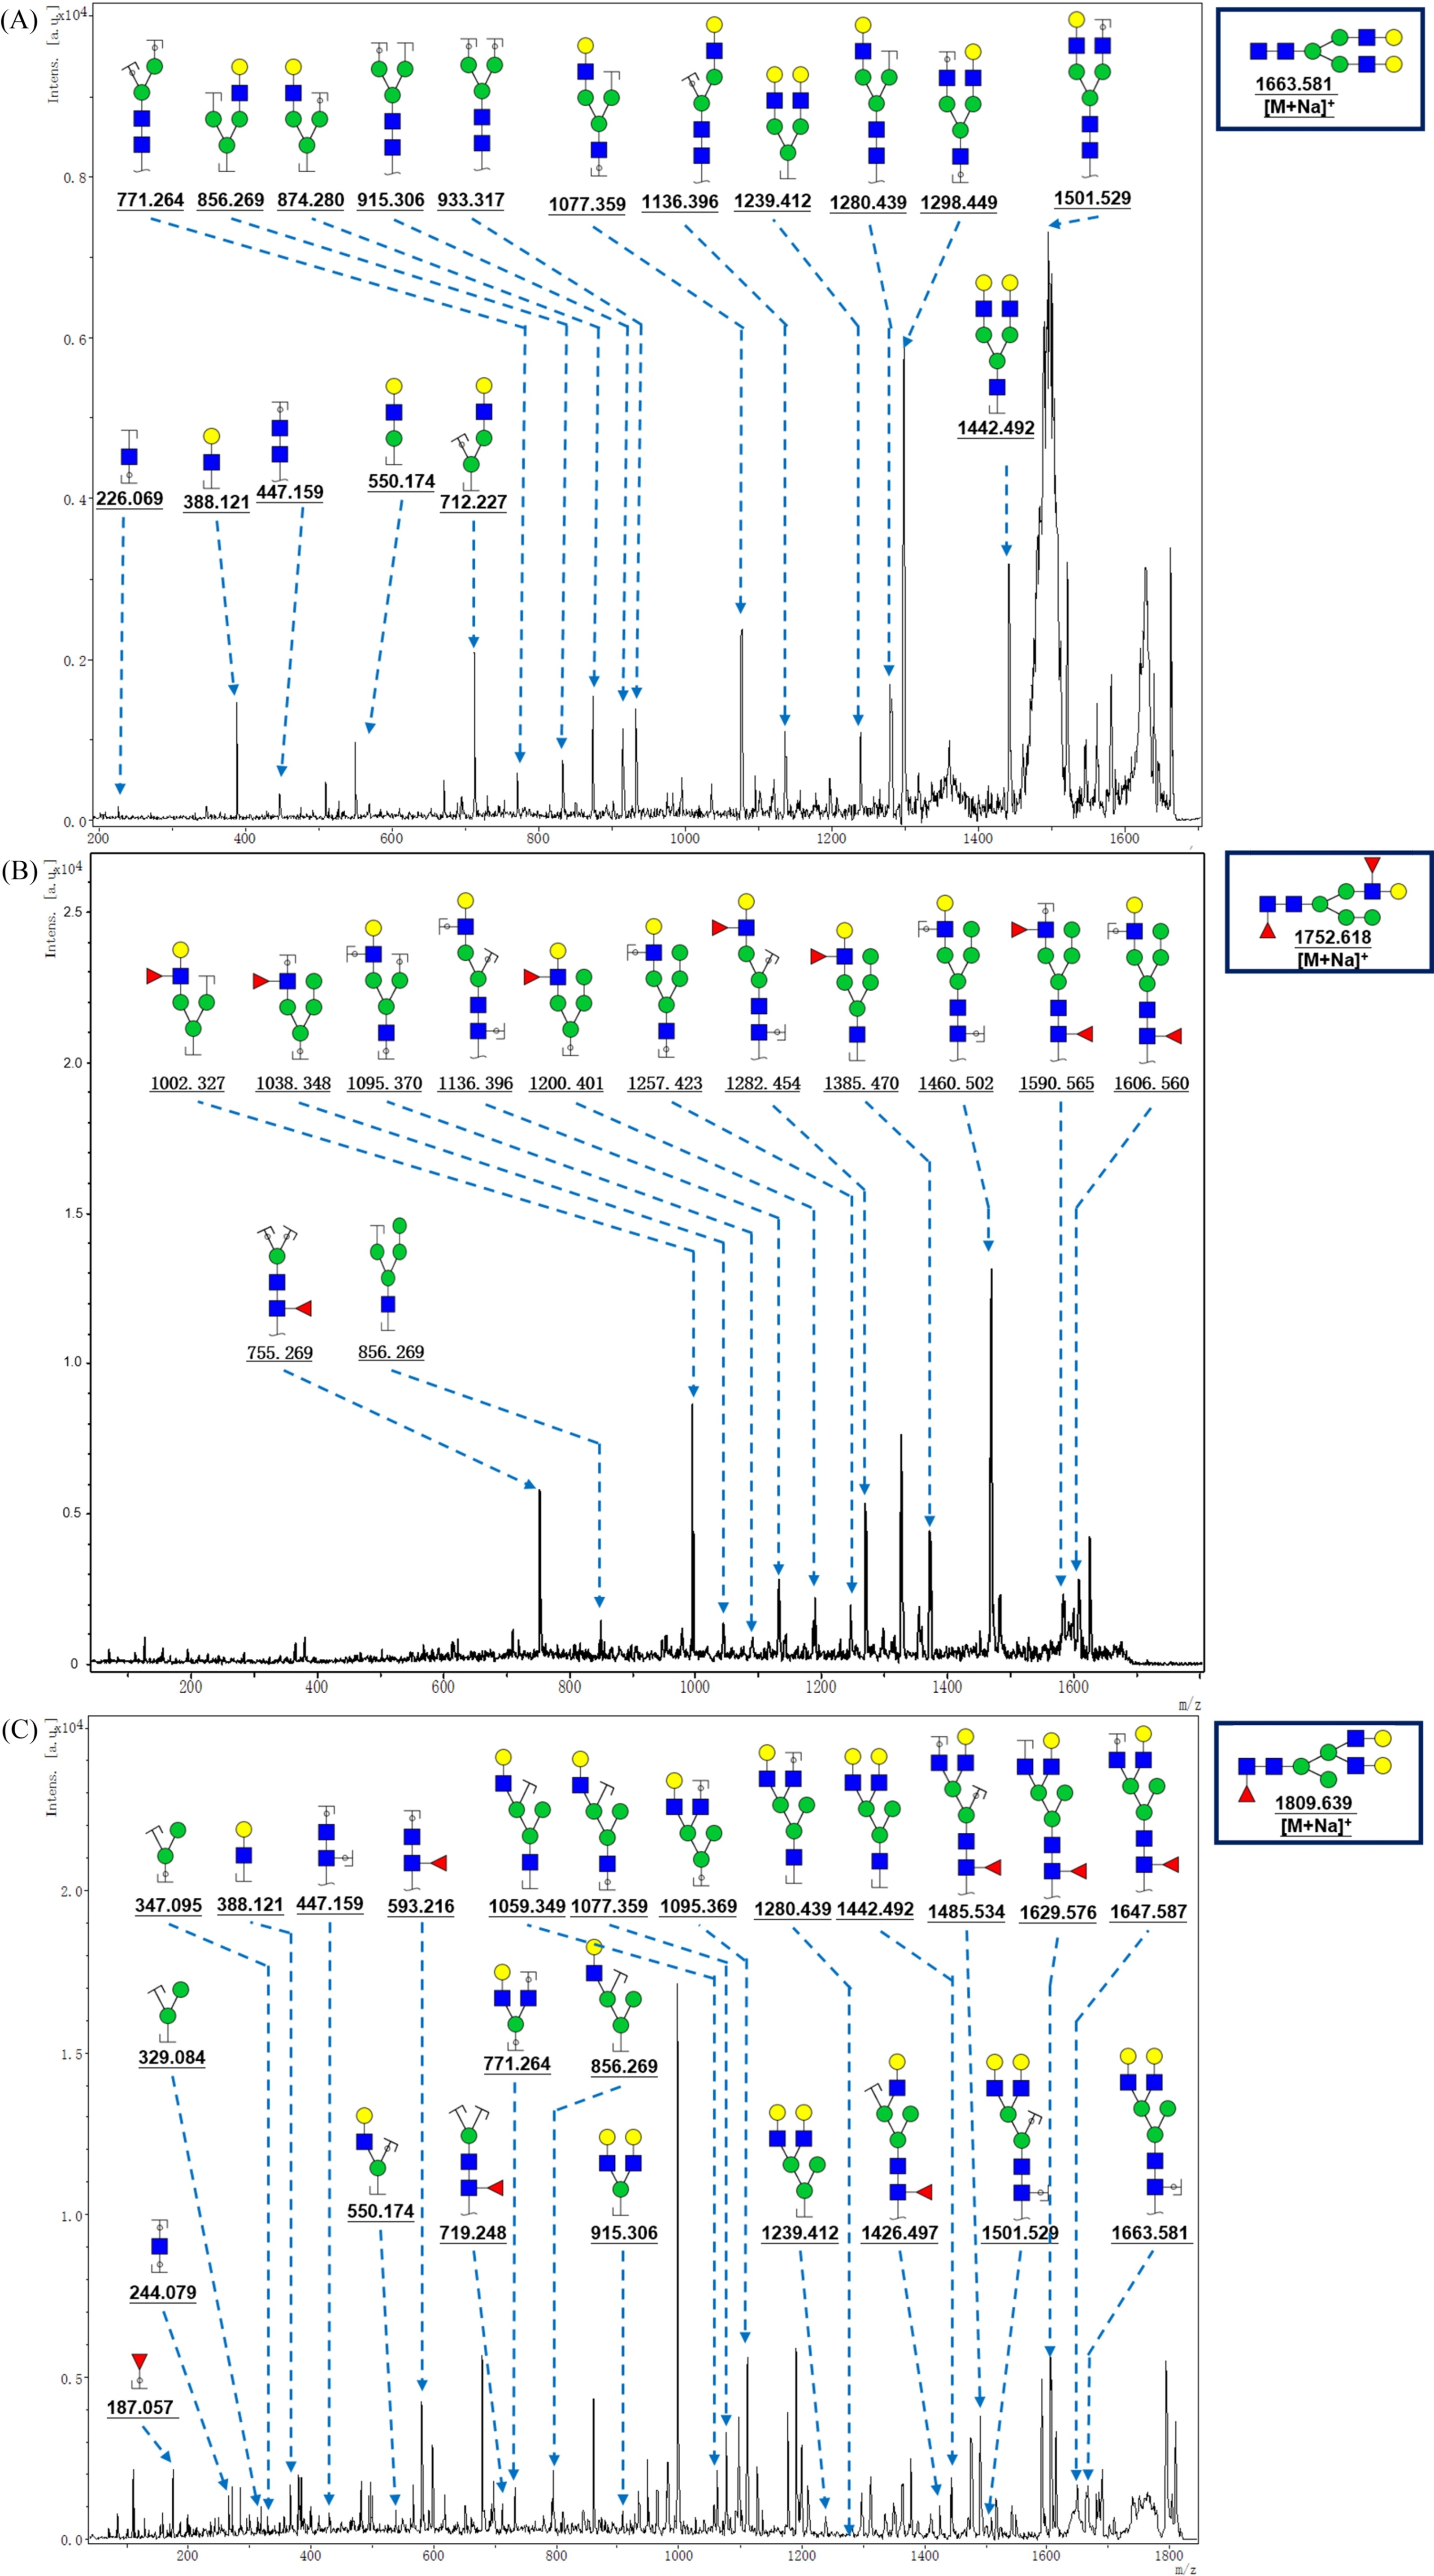 MALDI-TOF/TOF MS/MS analyzing theN-glycan precursor ion from MS spectra. The three N-glycan peaks (A) m/z 1663.581, (B) 1752.618, and (C) 1809.639 subjected to MS/MS analysis.